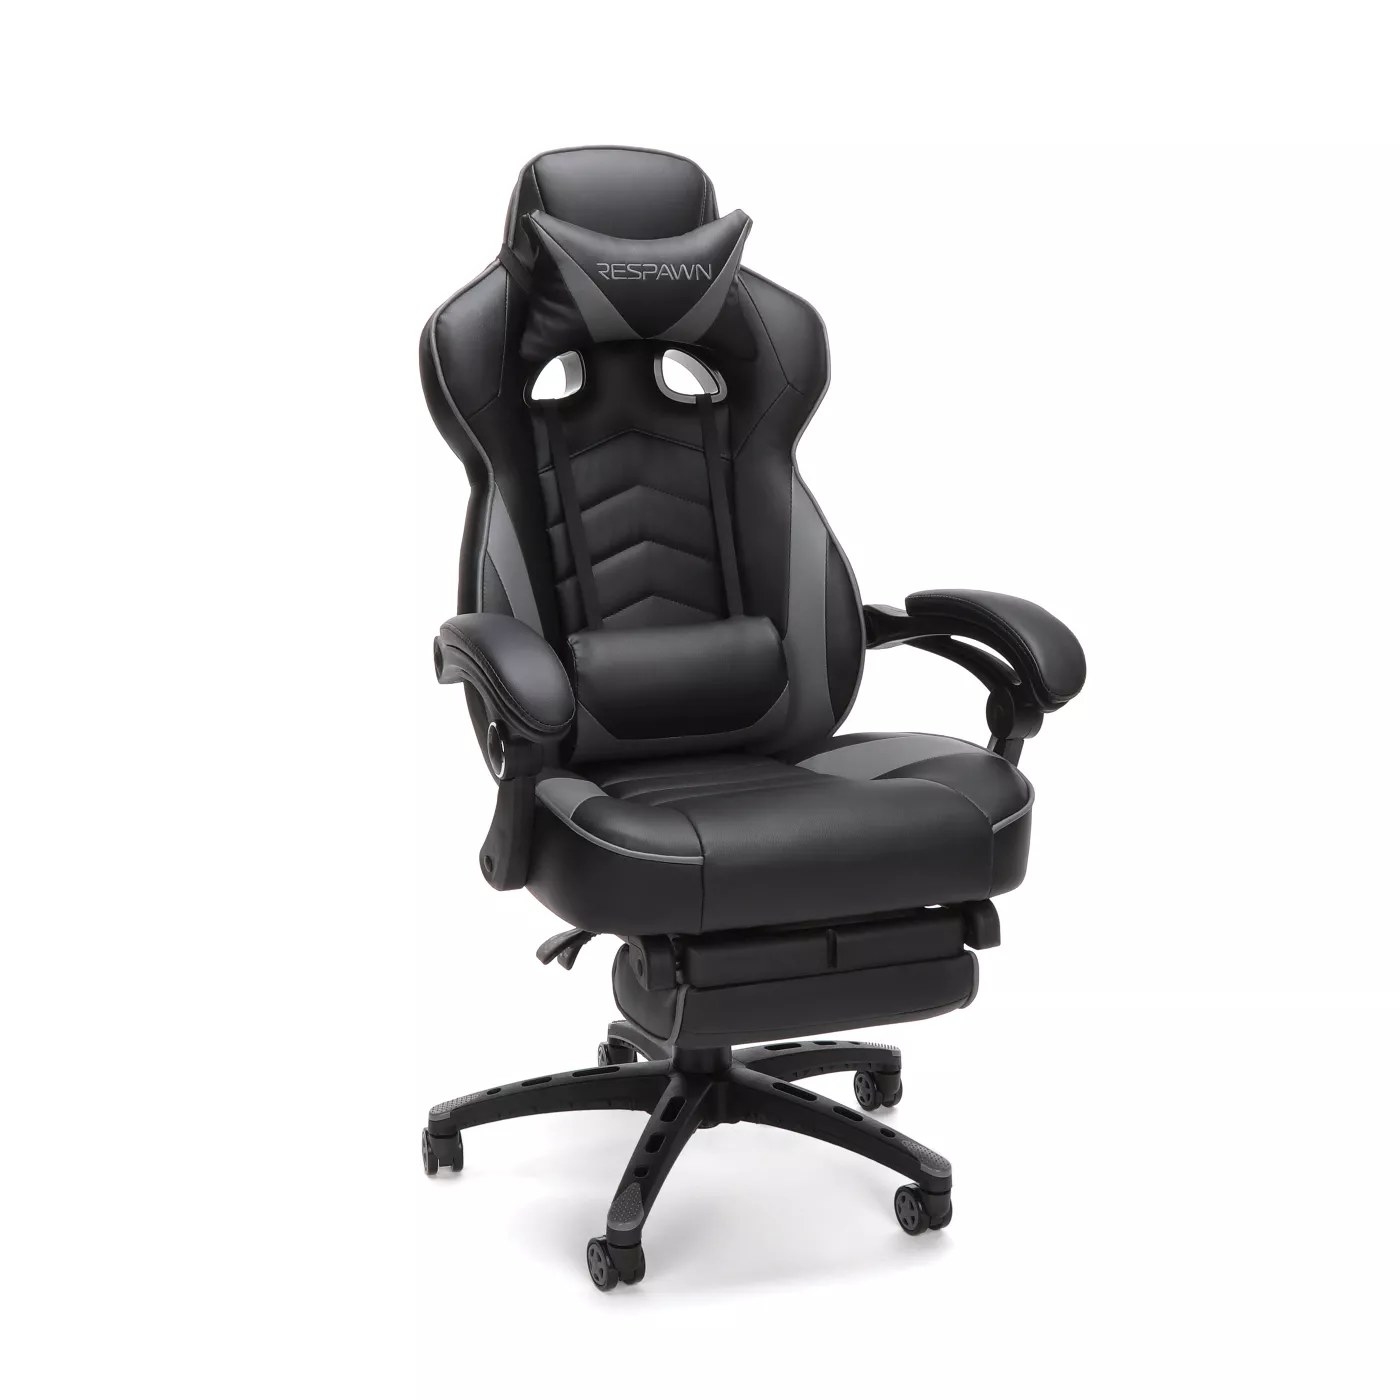 The black and gray RESPAWN chair with footrest